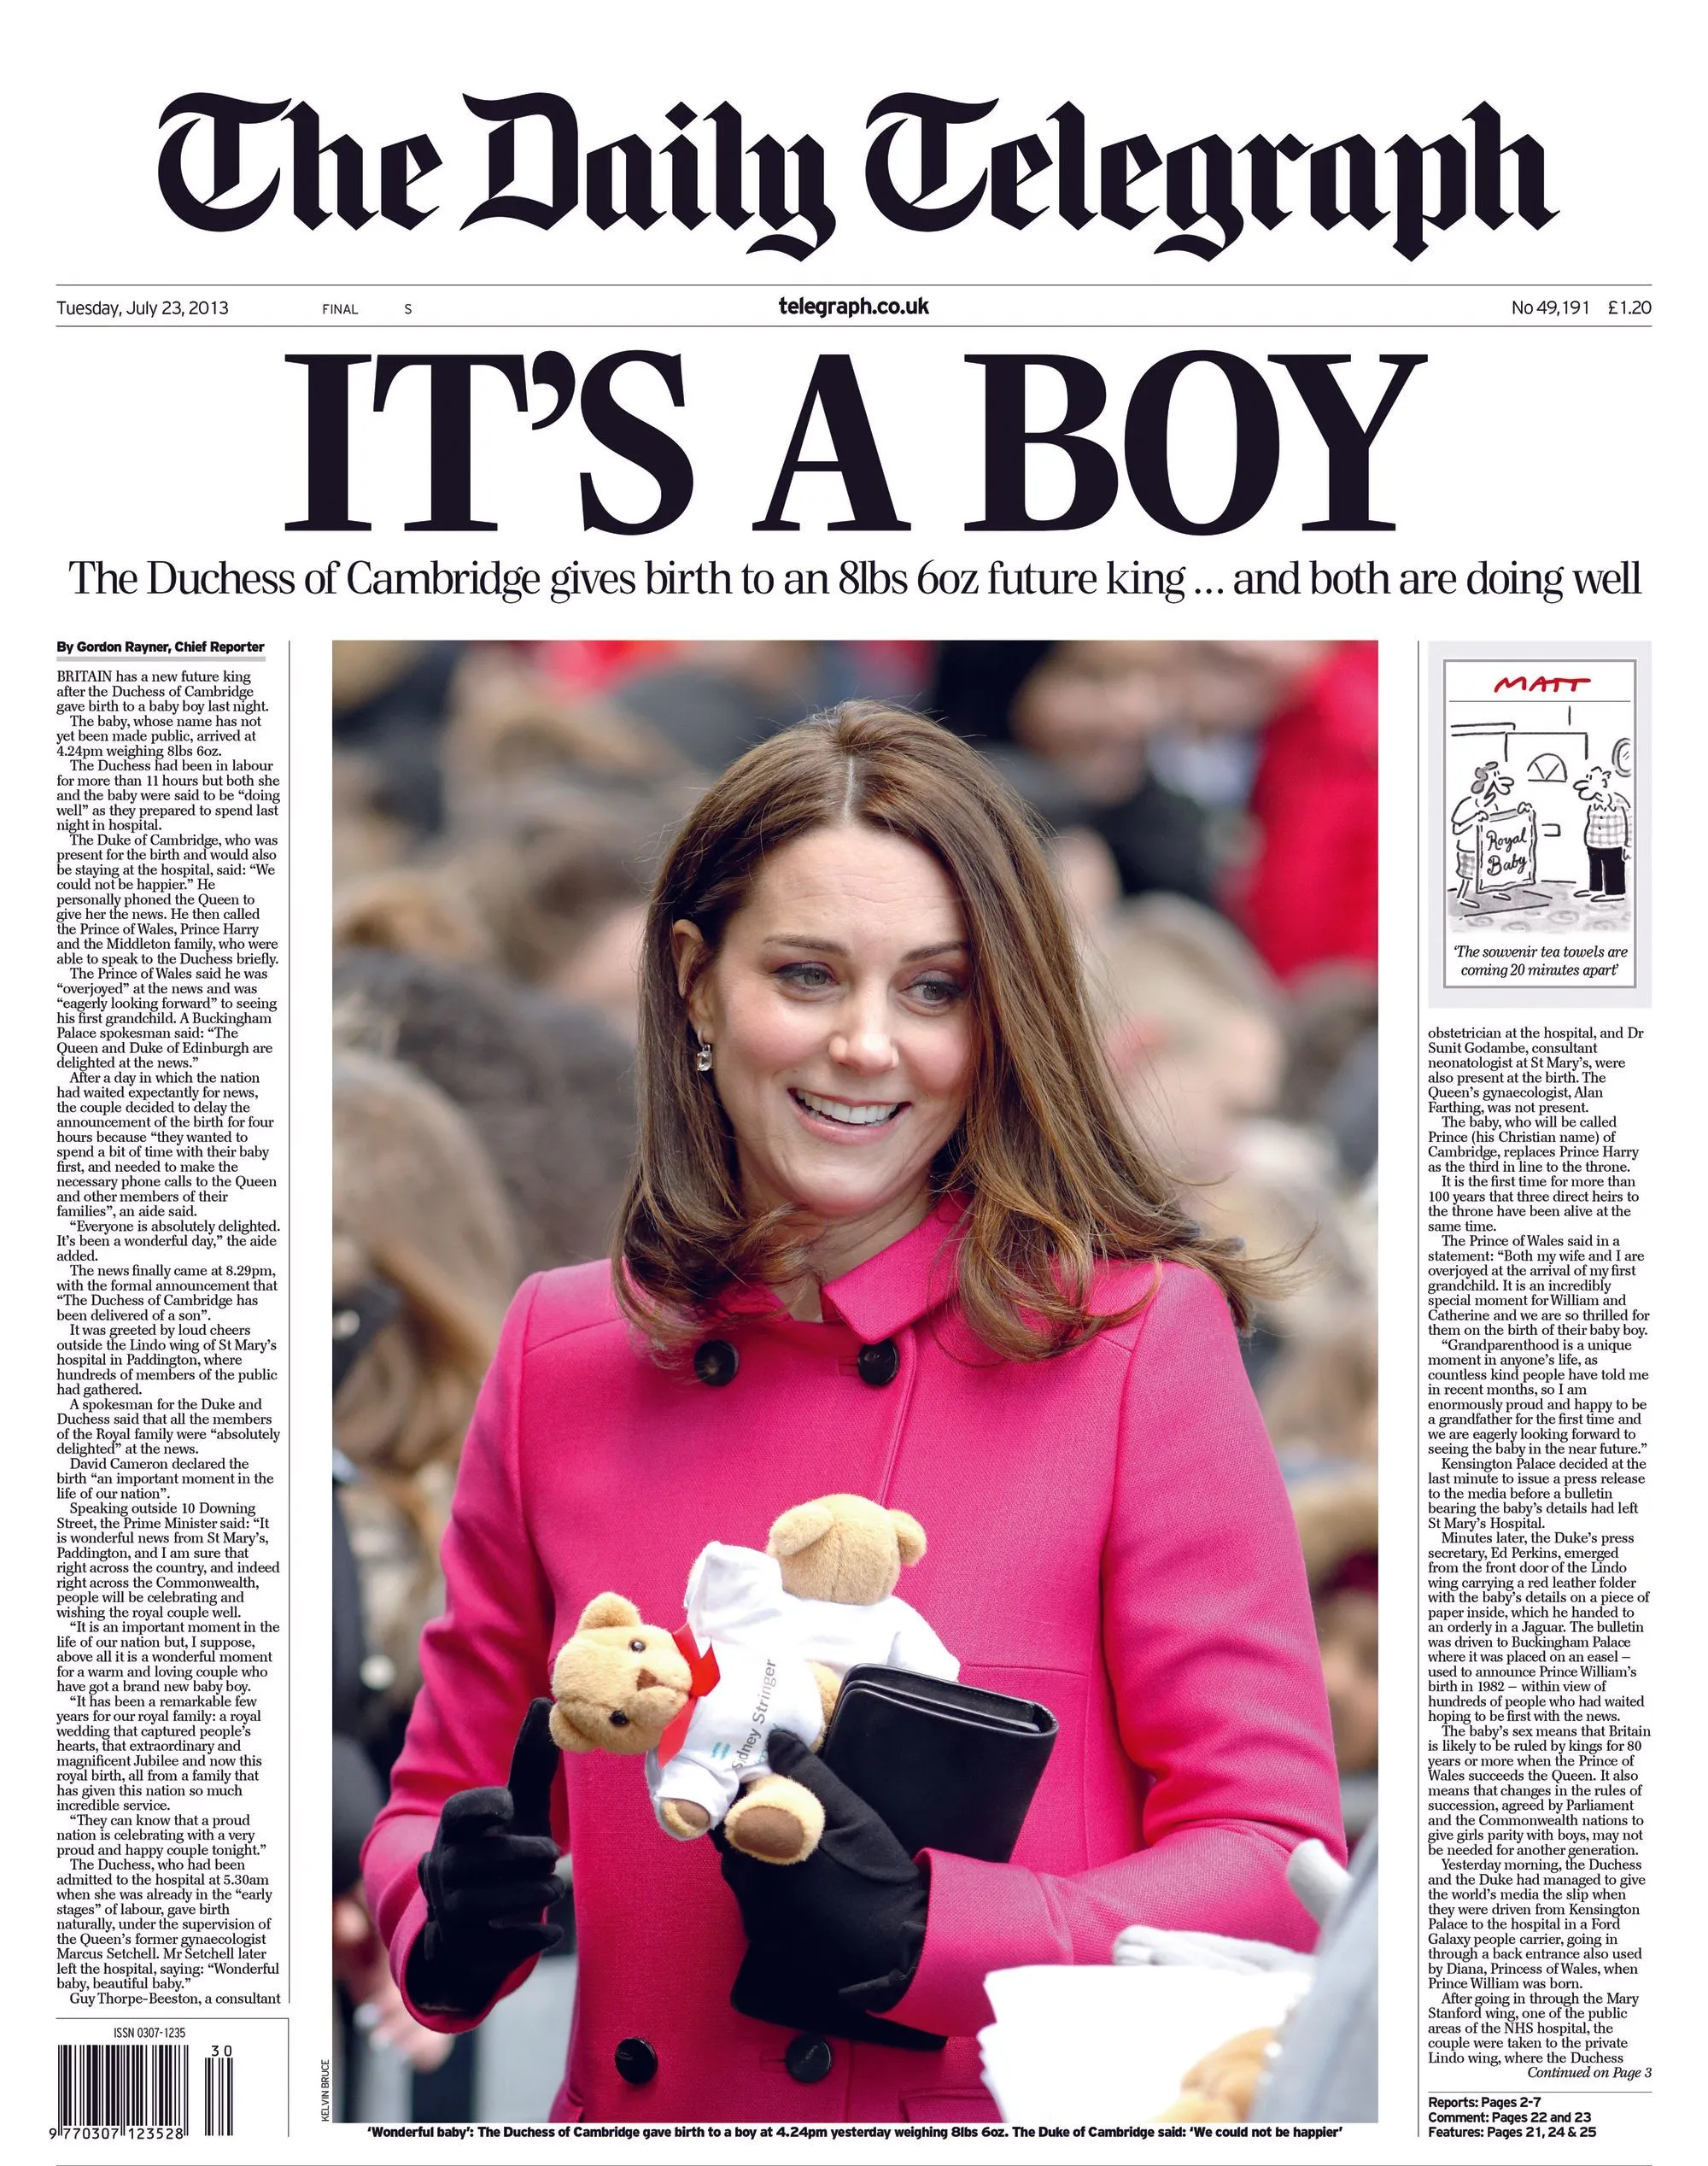 The Daily Telegraph, July 2013.